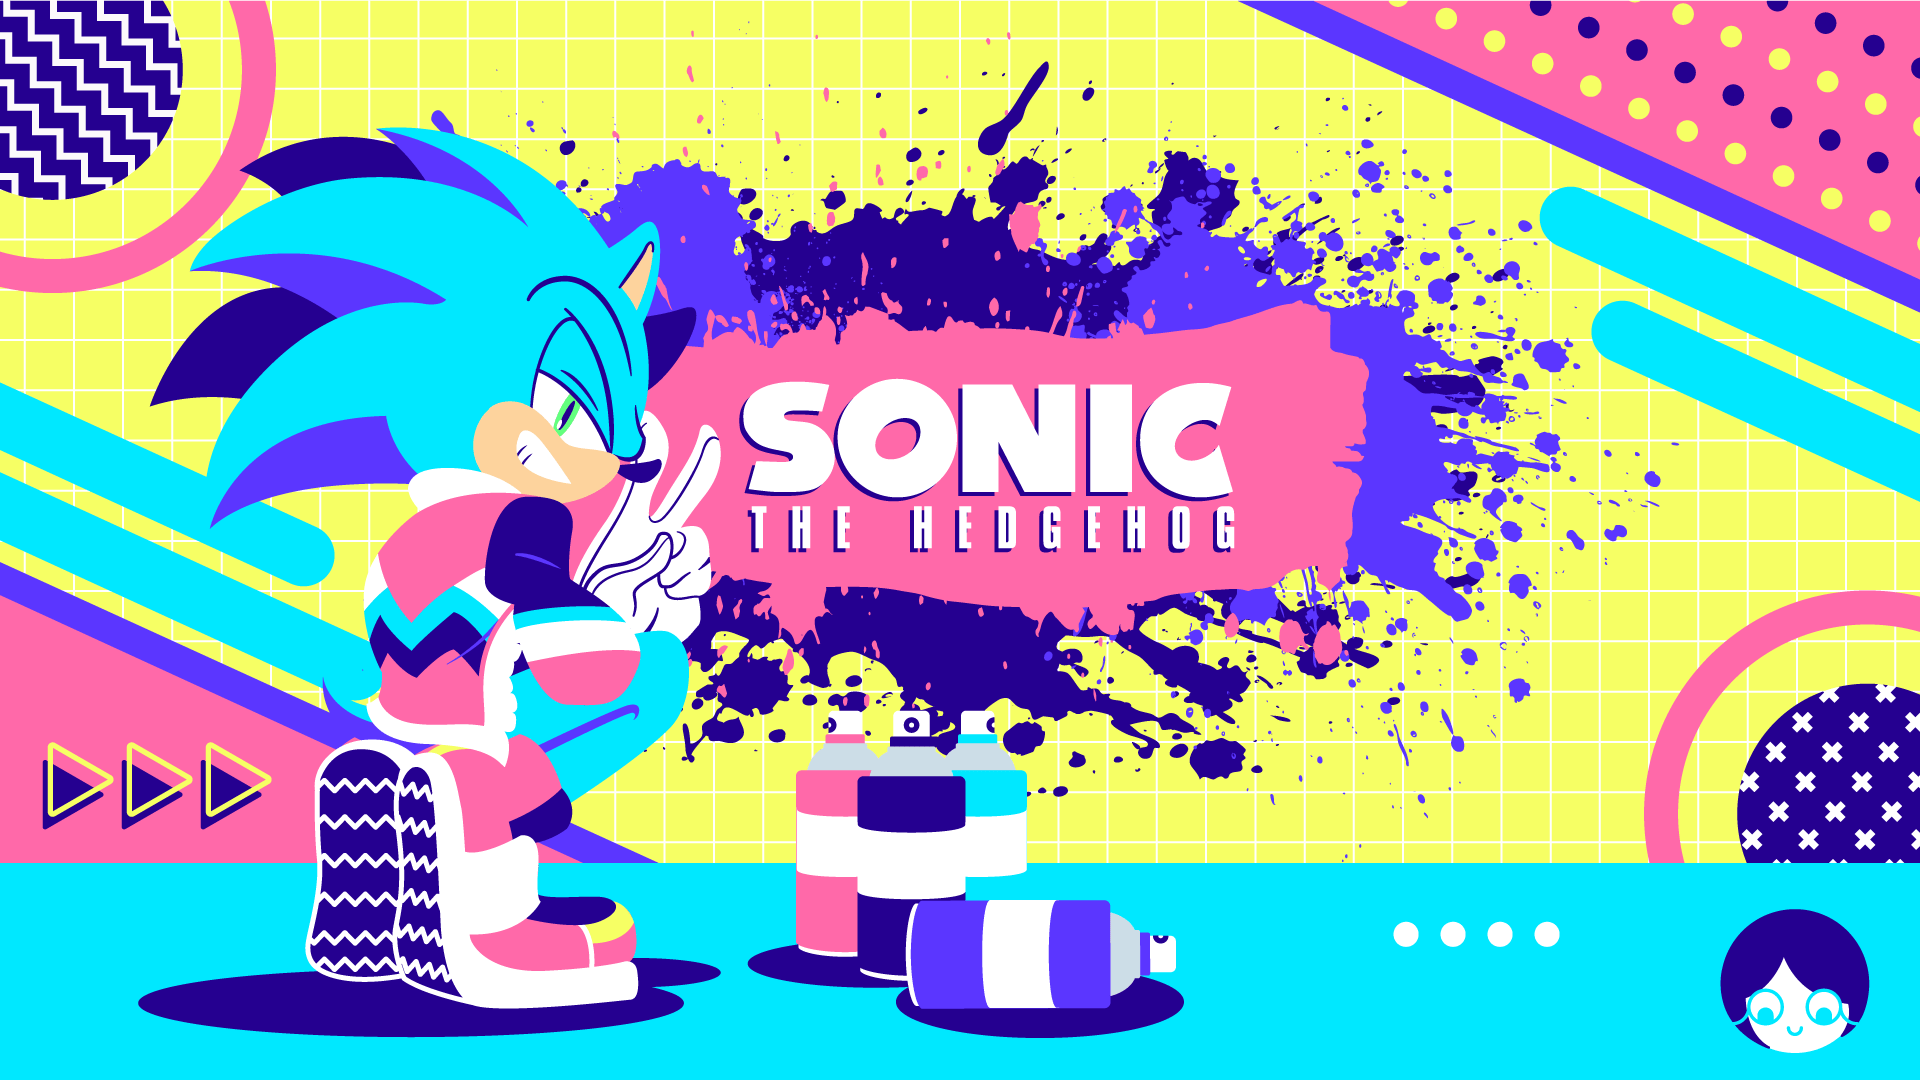 Can someone animate these sonic wallpaper?